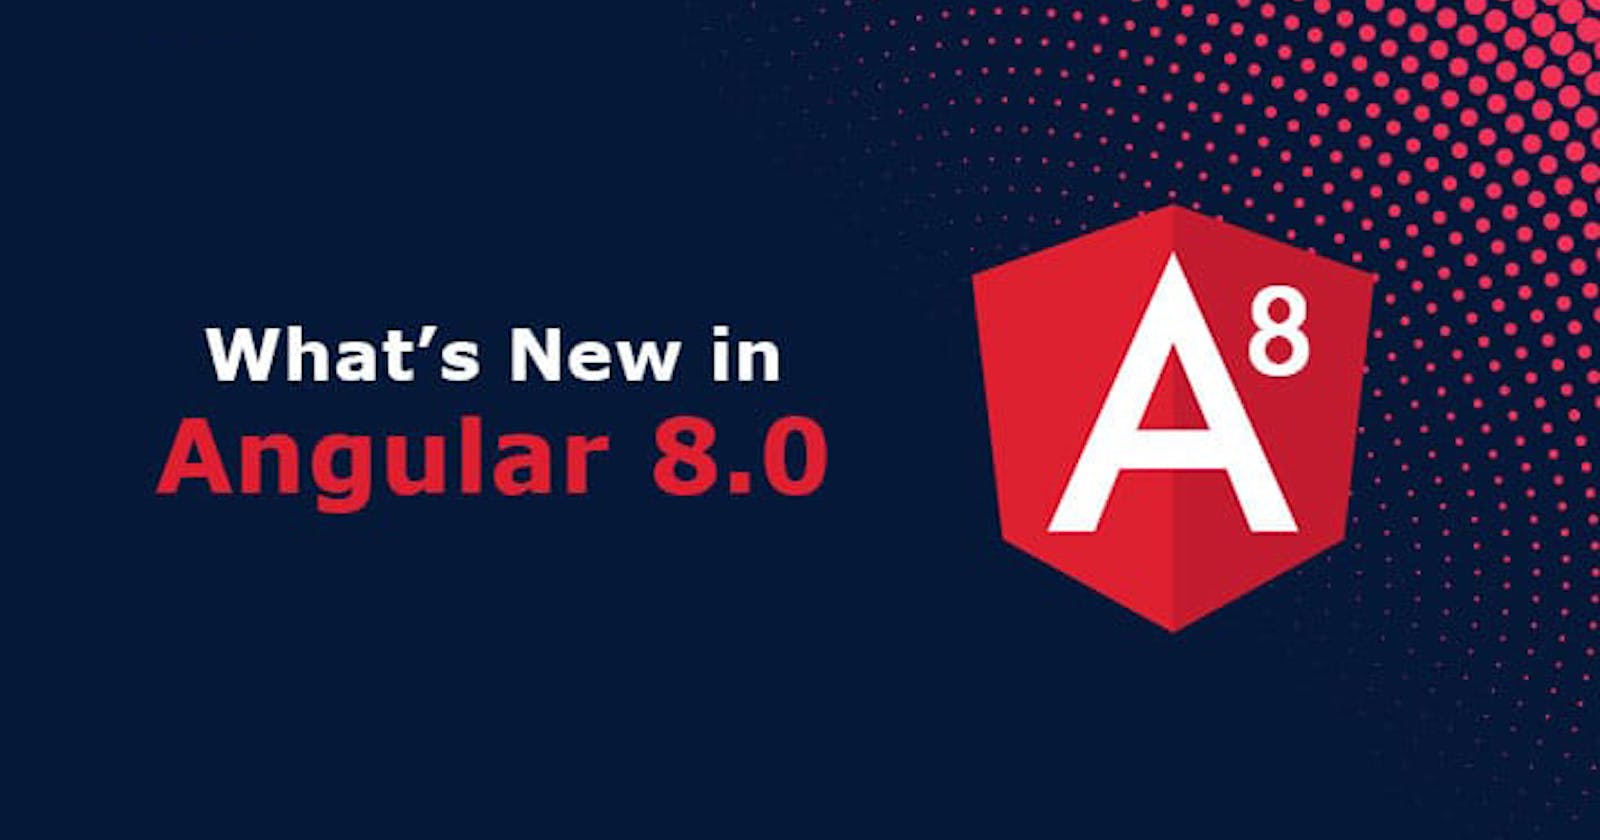 What is New in Angular 8.0: Introduction, Features, & Advantages